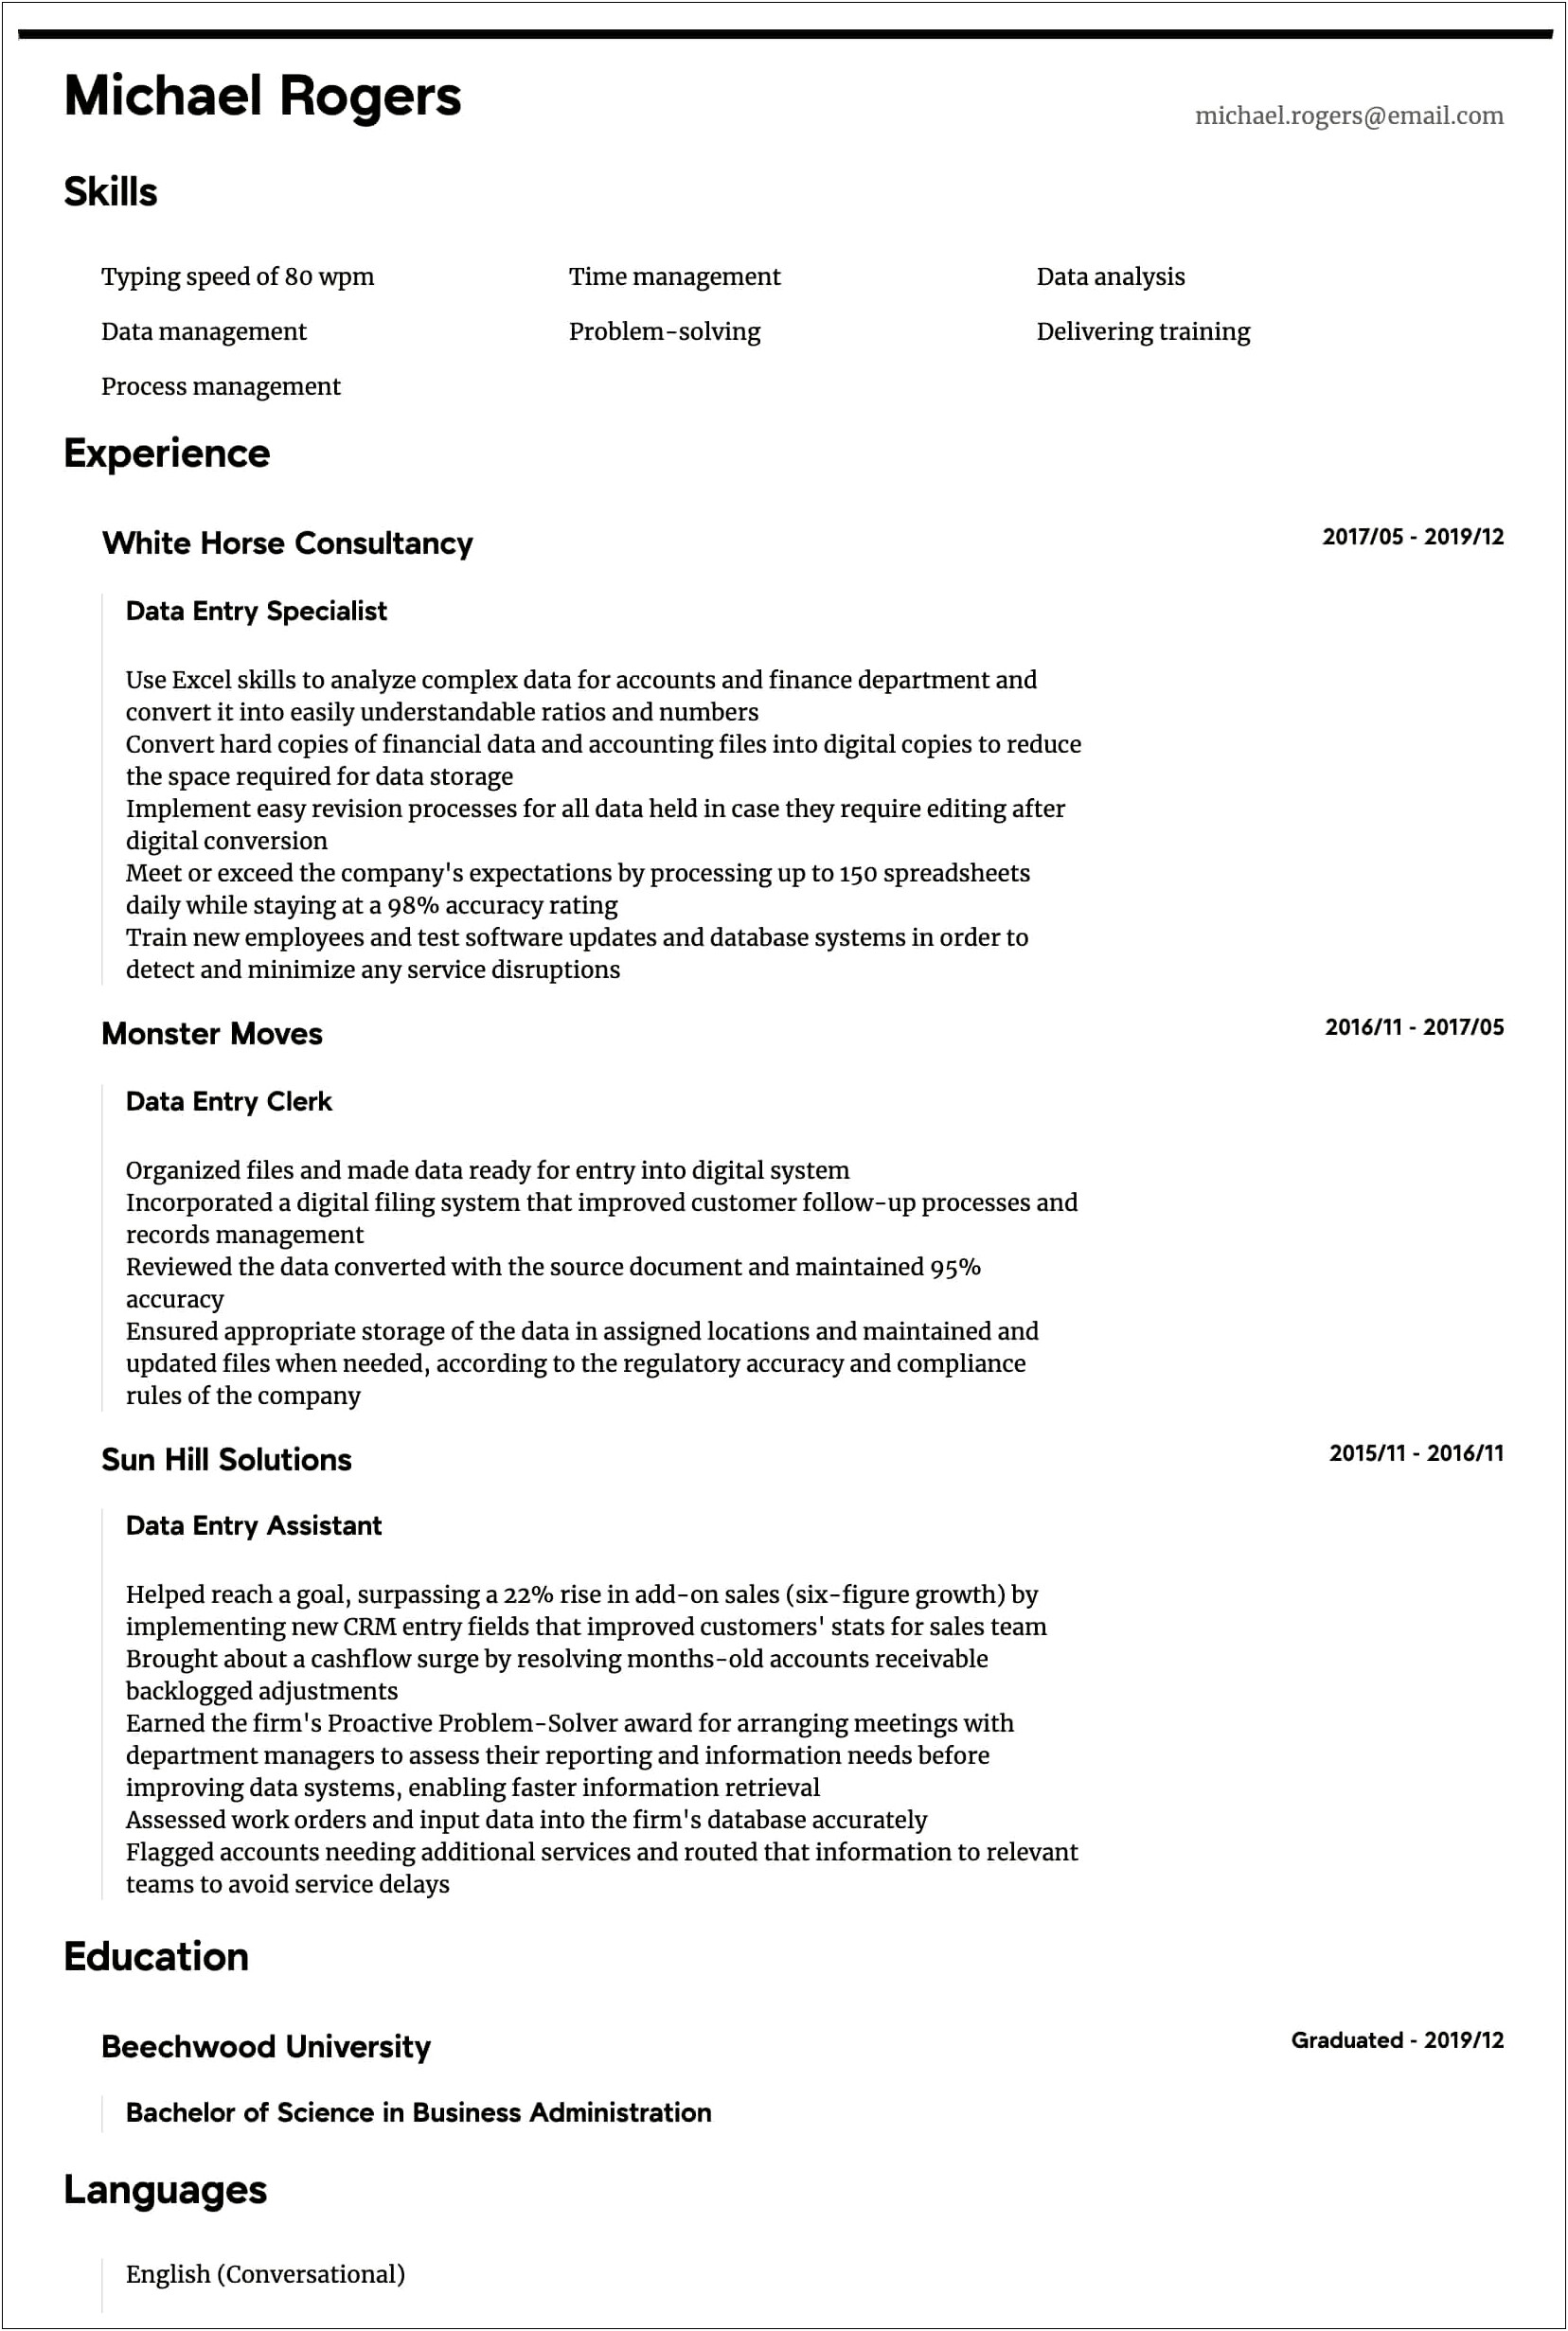 Resume Headline For Data Entry No Experience